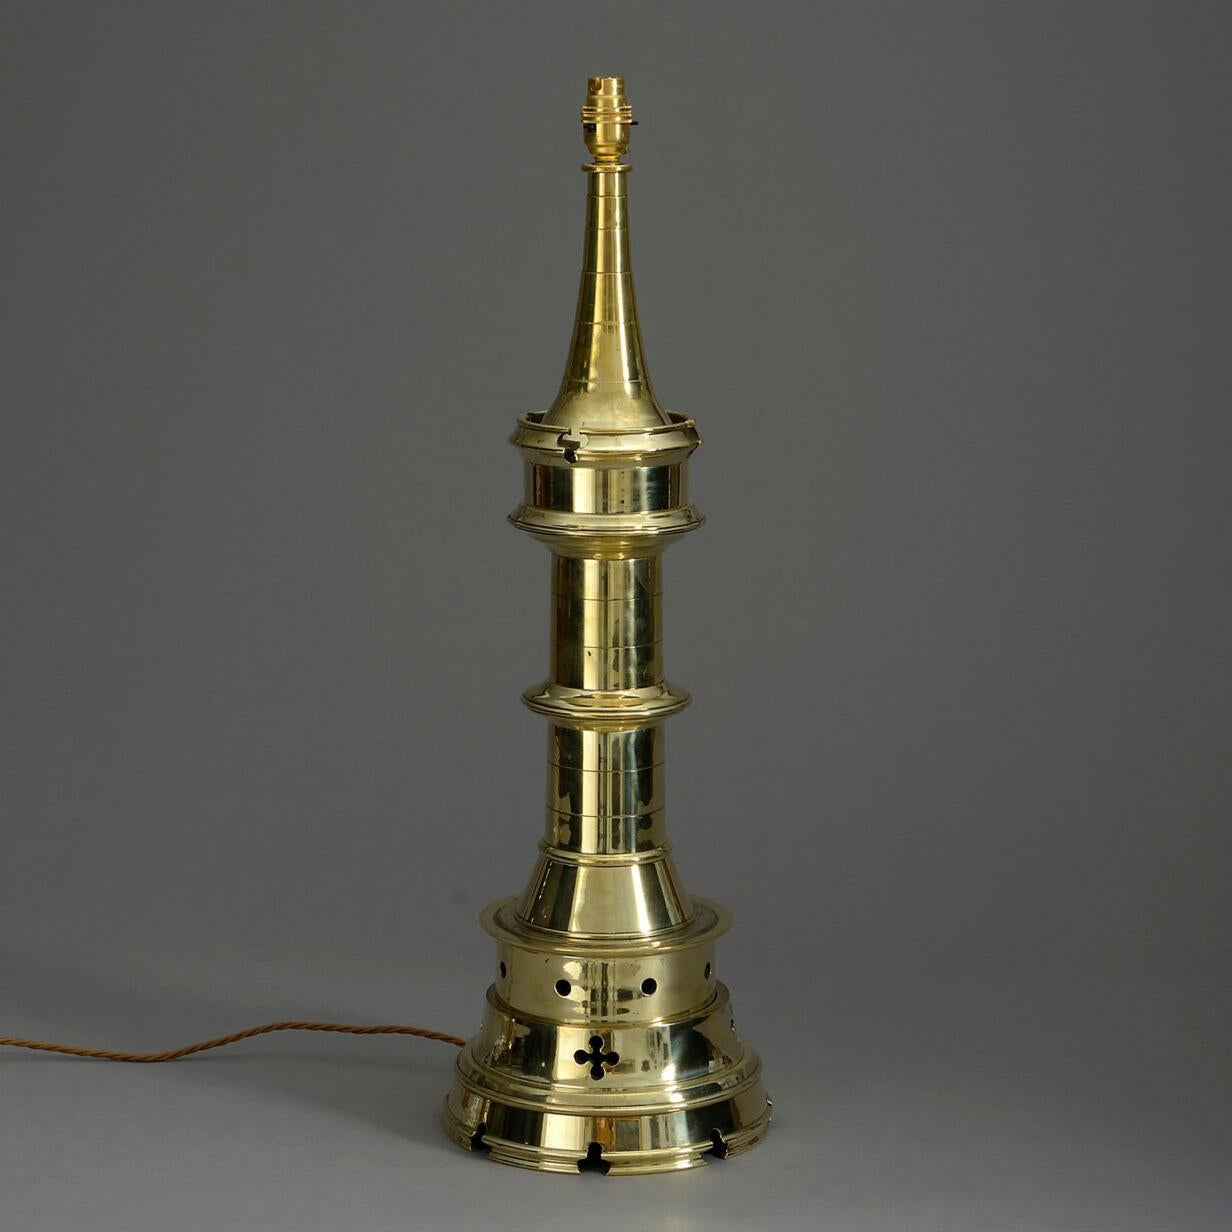 A most unusual example of early 20th century Aesthetic Movement lighting. Takiing the form of a lighthouse, this polished cast brass lamp has tremendous scale and is to the best of our understanding unique.

We can rewire this to all international